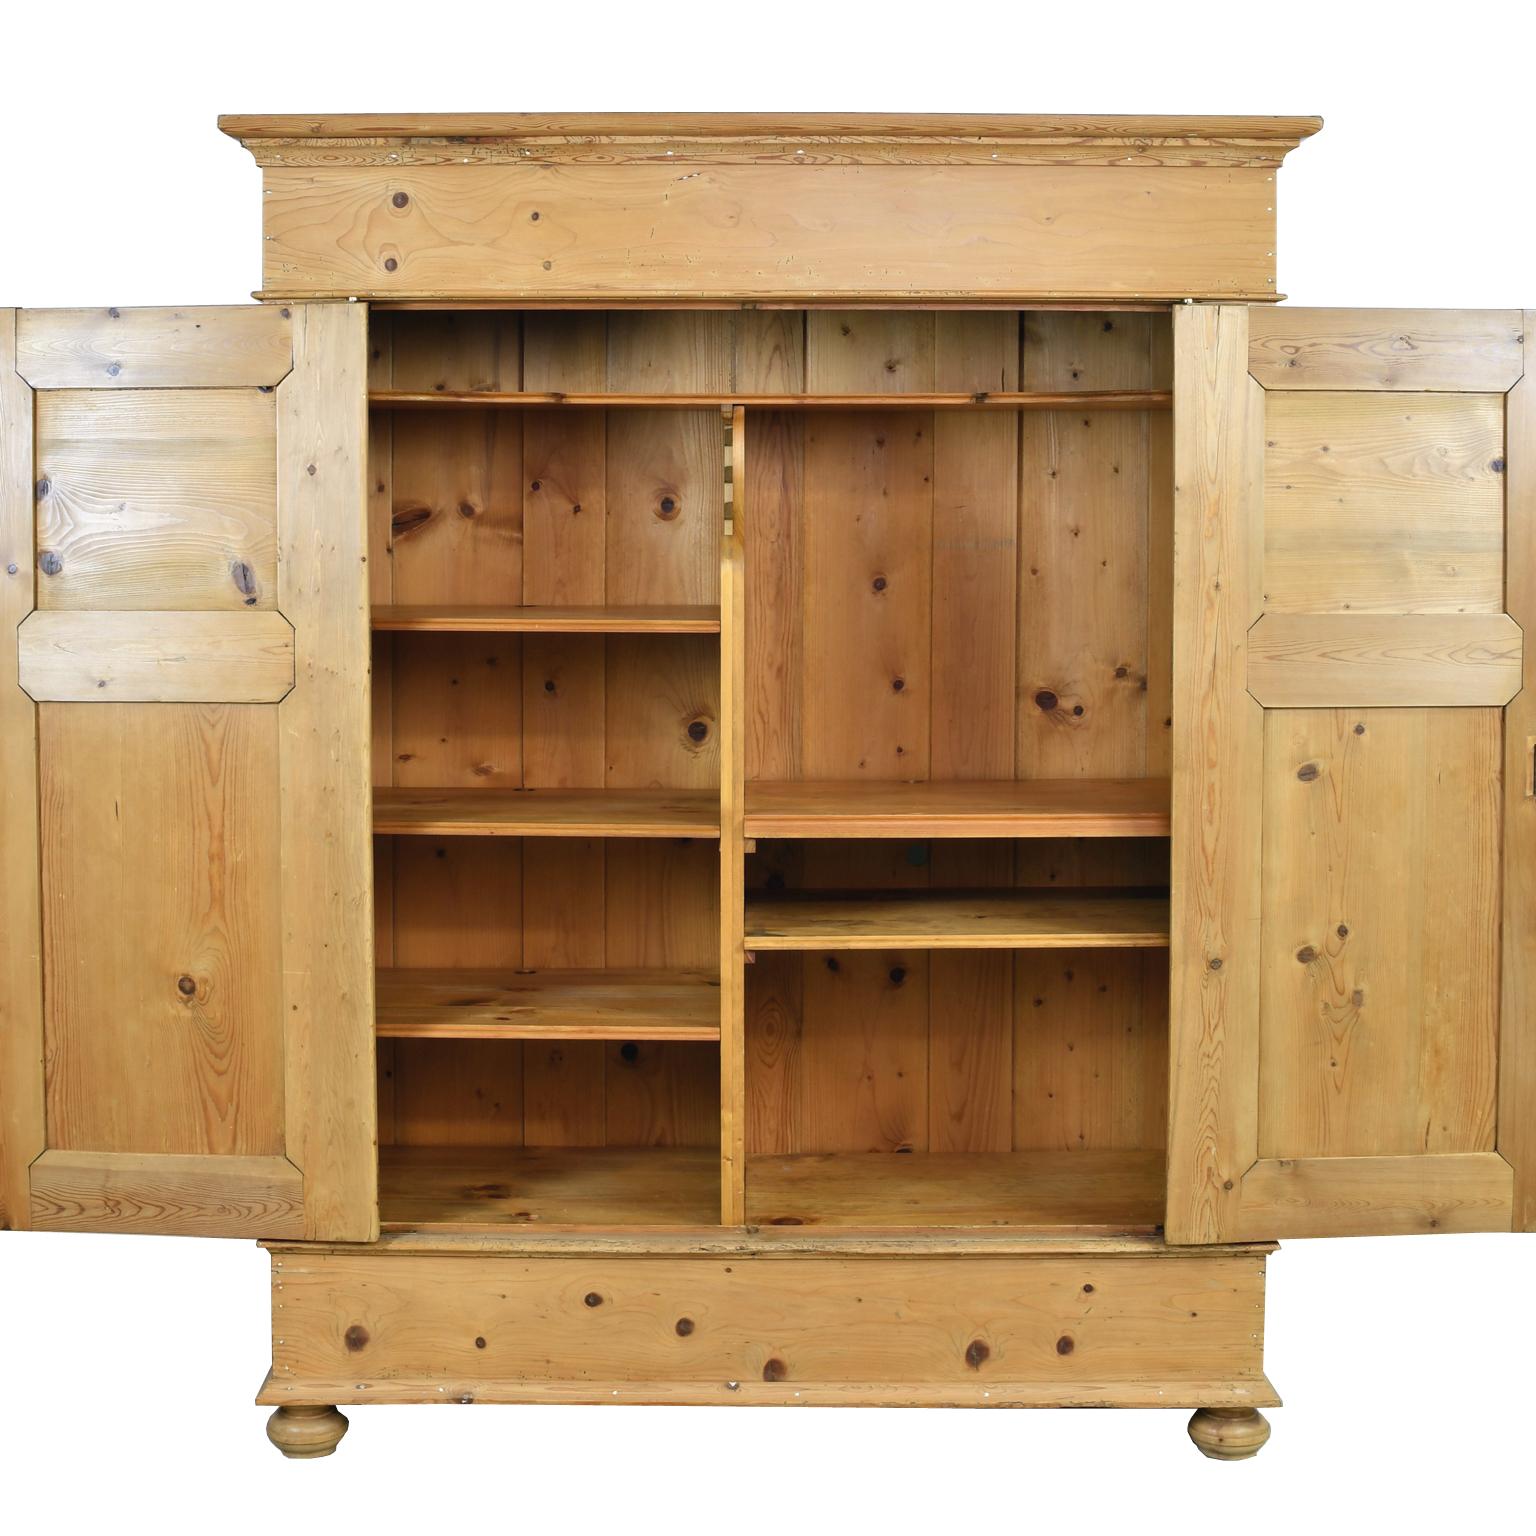 A large armoire in a light honey-colored pine with two paneled doors, leather key plates and turned bun feet. North German, circa 1830. Doors open flush with the front of the piece, allowing easy access to the interior. Comes with key and working